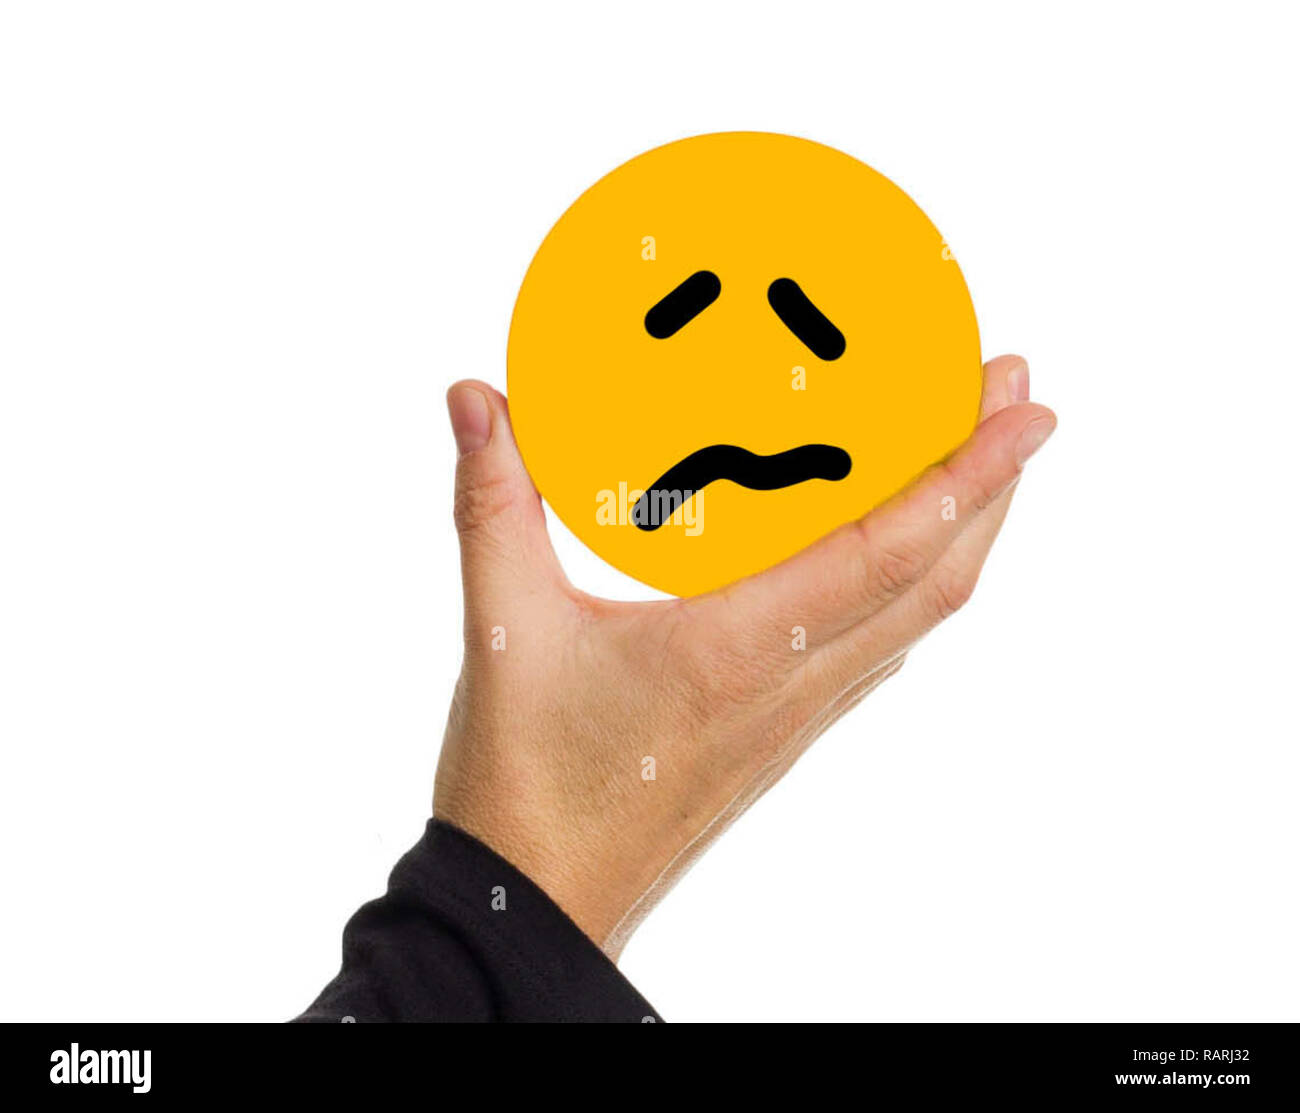 Hand holding a yellow circle with face expression exhausted illustration. Stock Photo